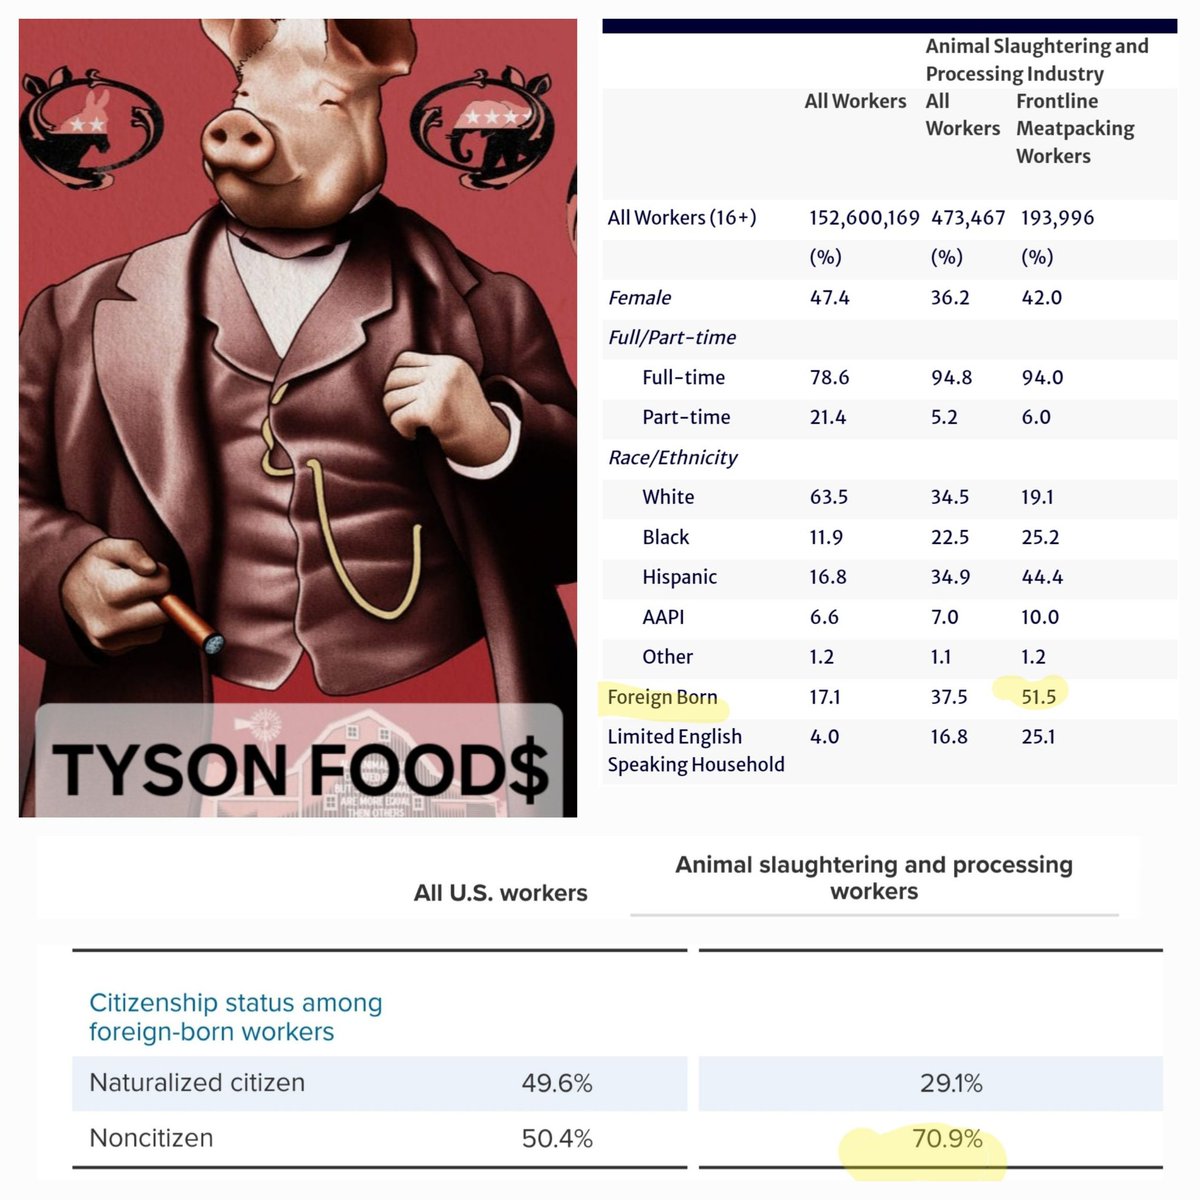 People are complaining that Tyson plans to replace Americans with cheap foreign labor. Thing is: they've already done that. The largest group of people working in slaughterhouses, by far, are not citizens. Now even they've gotten too expensive for the corporate hogs of Big Ag.